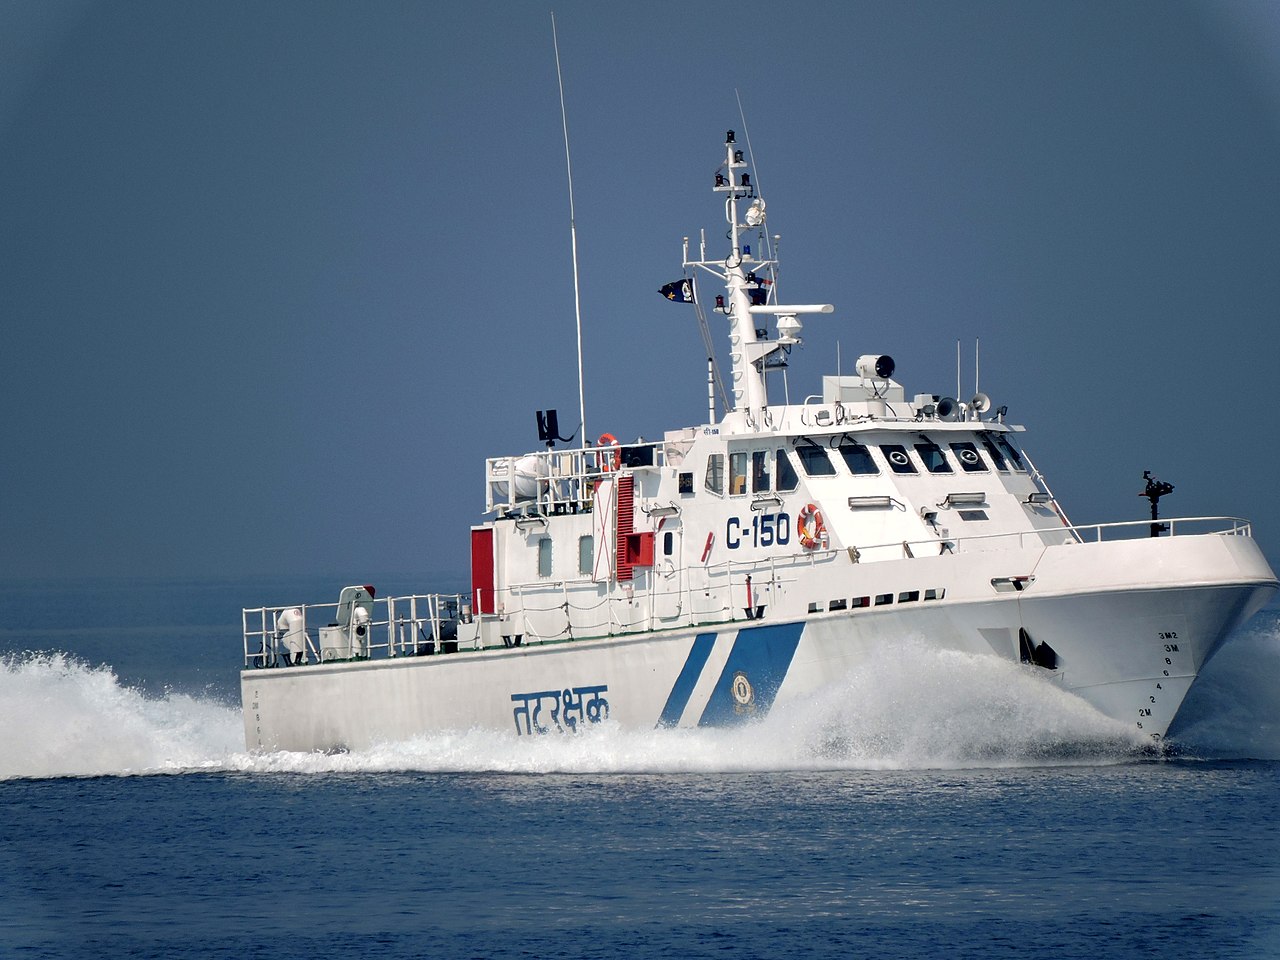 Defence Ministry Secures Deal For Acquisition Of 6 Patrol Vessels To Strengthen Coast Guard